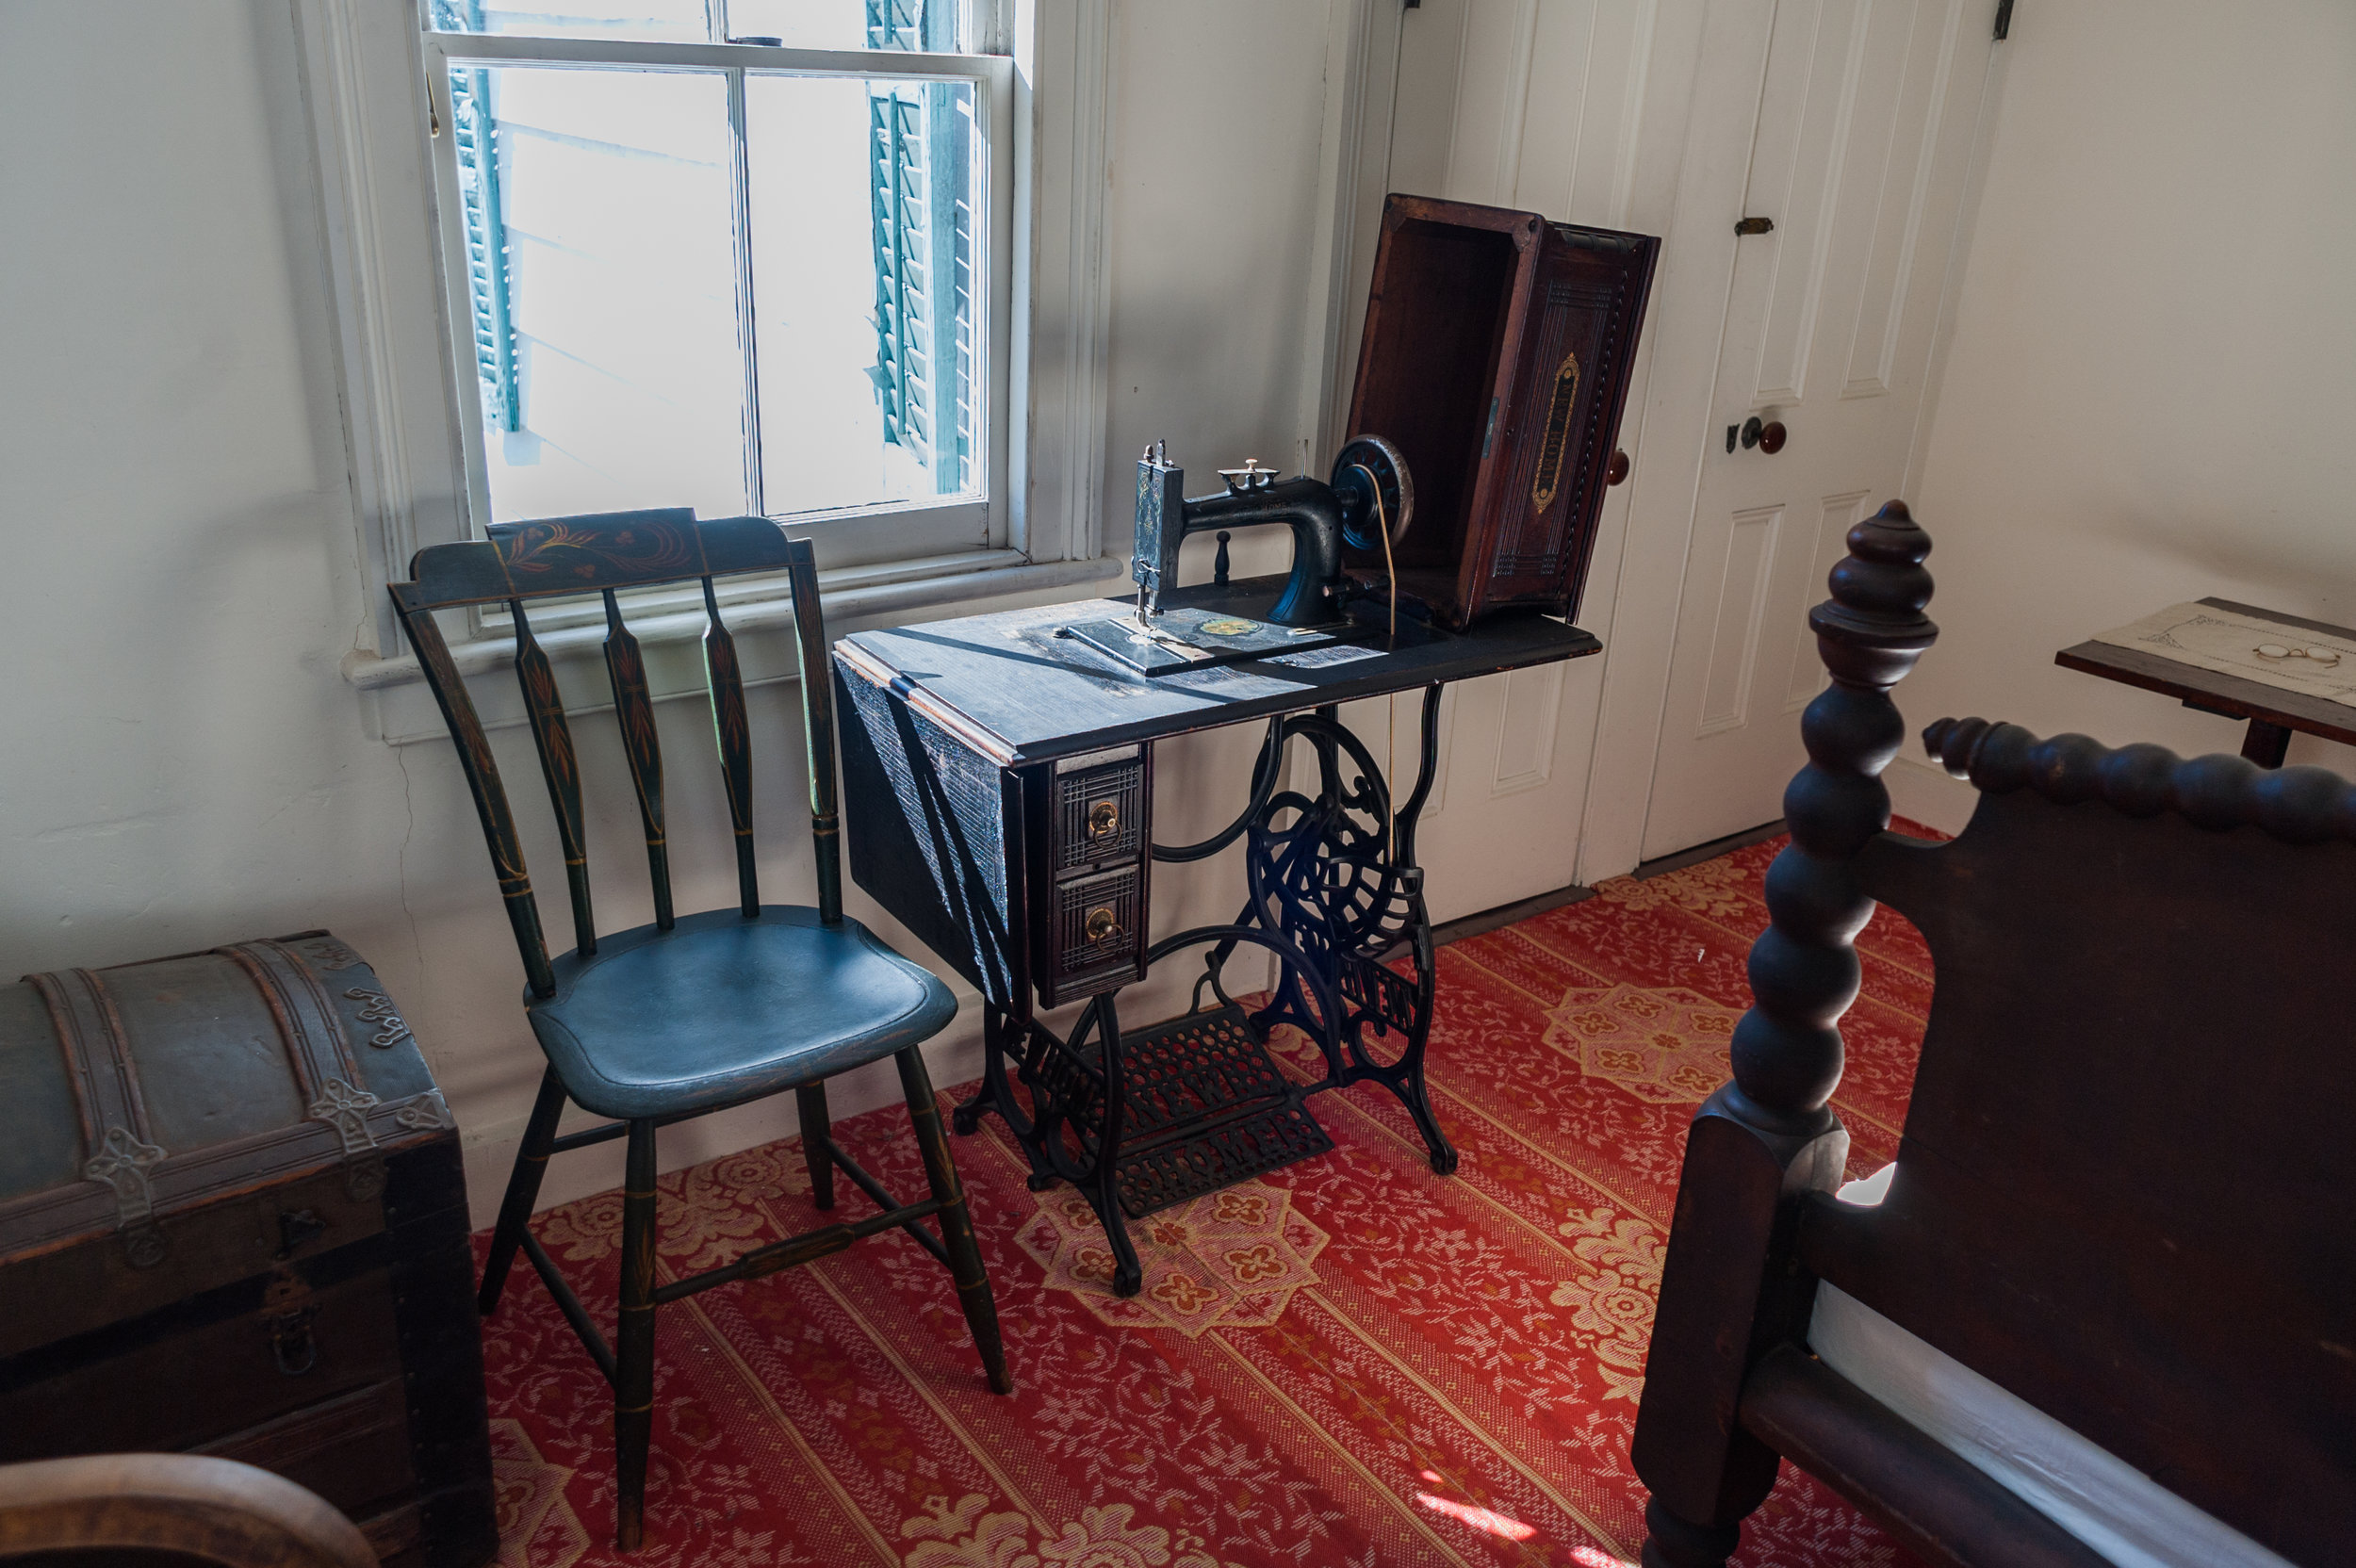 A later model sewing machine was placed in the master bedroom. The pattern of the carpet is Linderwald. It was copied from the 1856 James Van Buren House in Kinderhook, New York. (Copy)